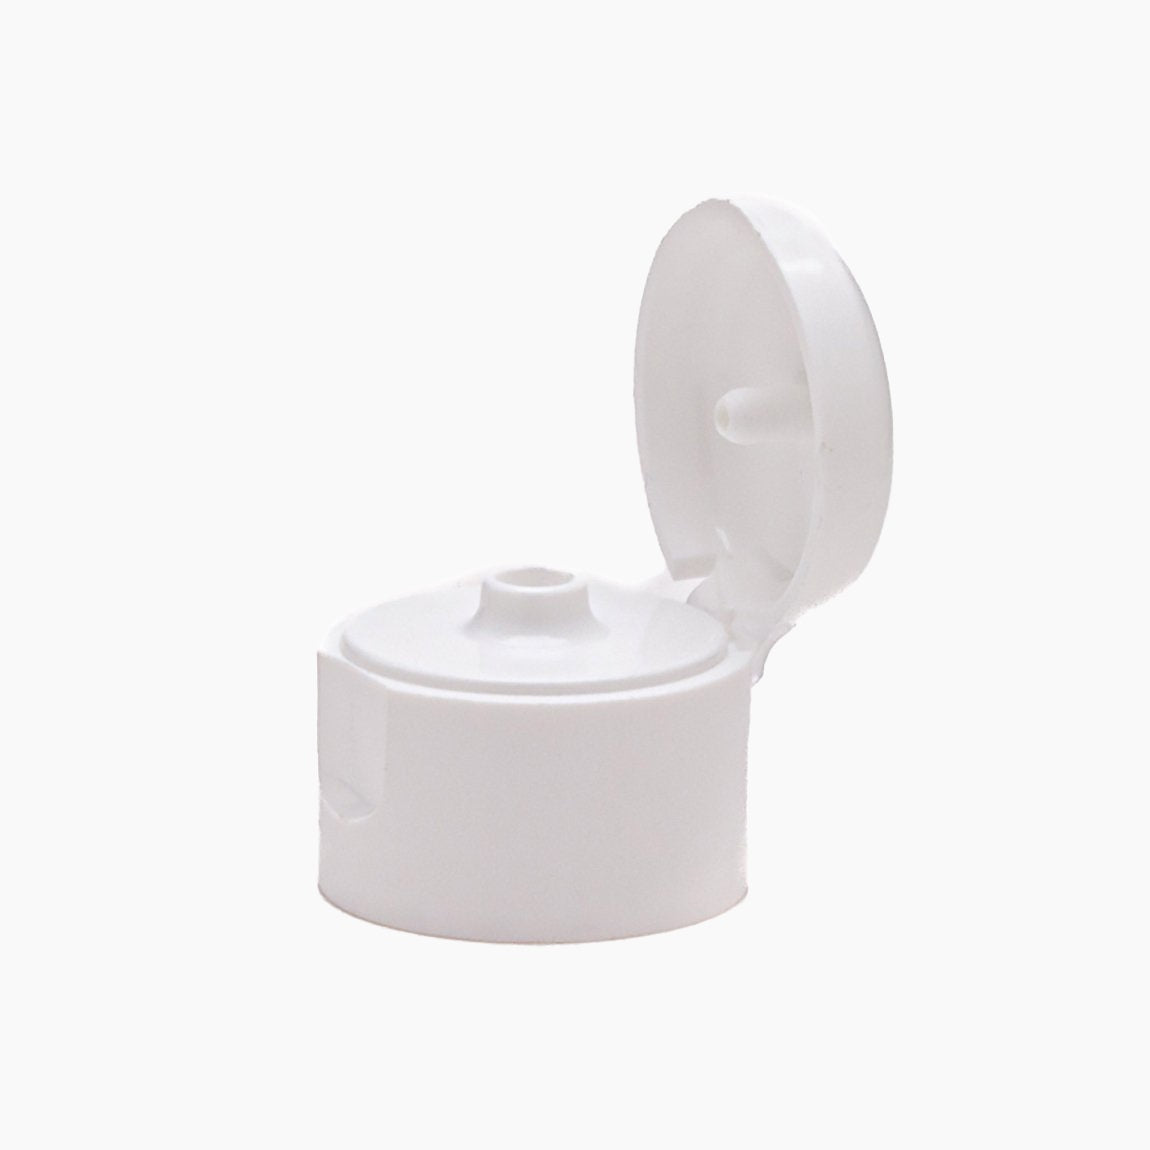 White 24mm Open Flip Top Cap On A White Background | Brightpack Closures And Accessories